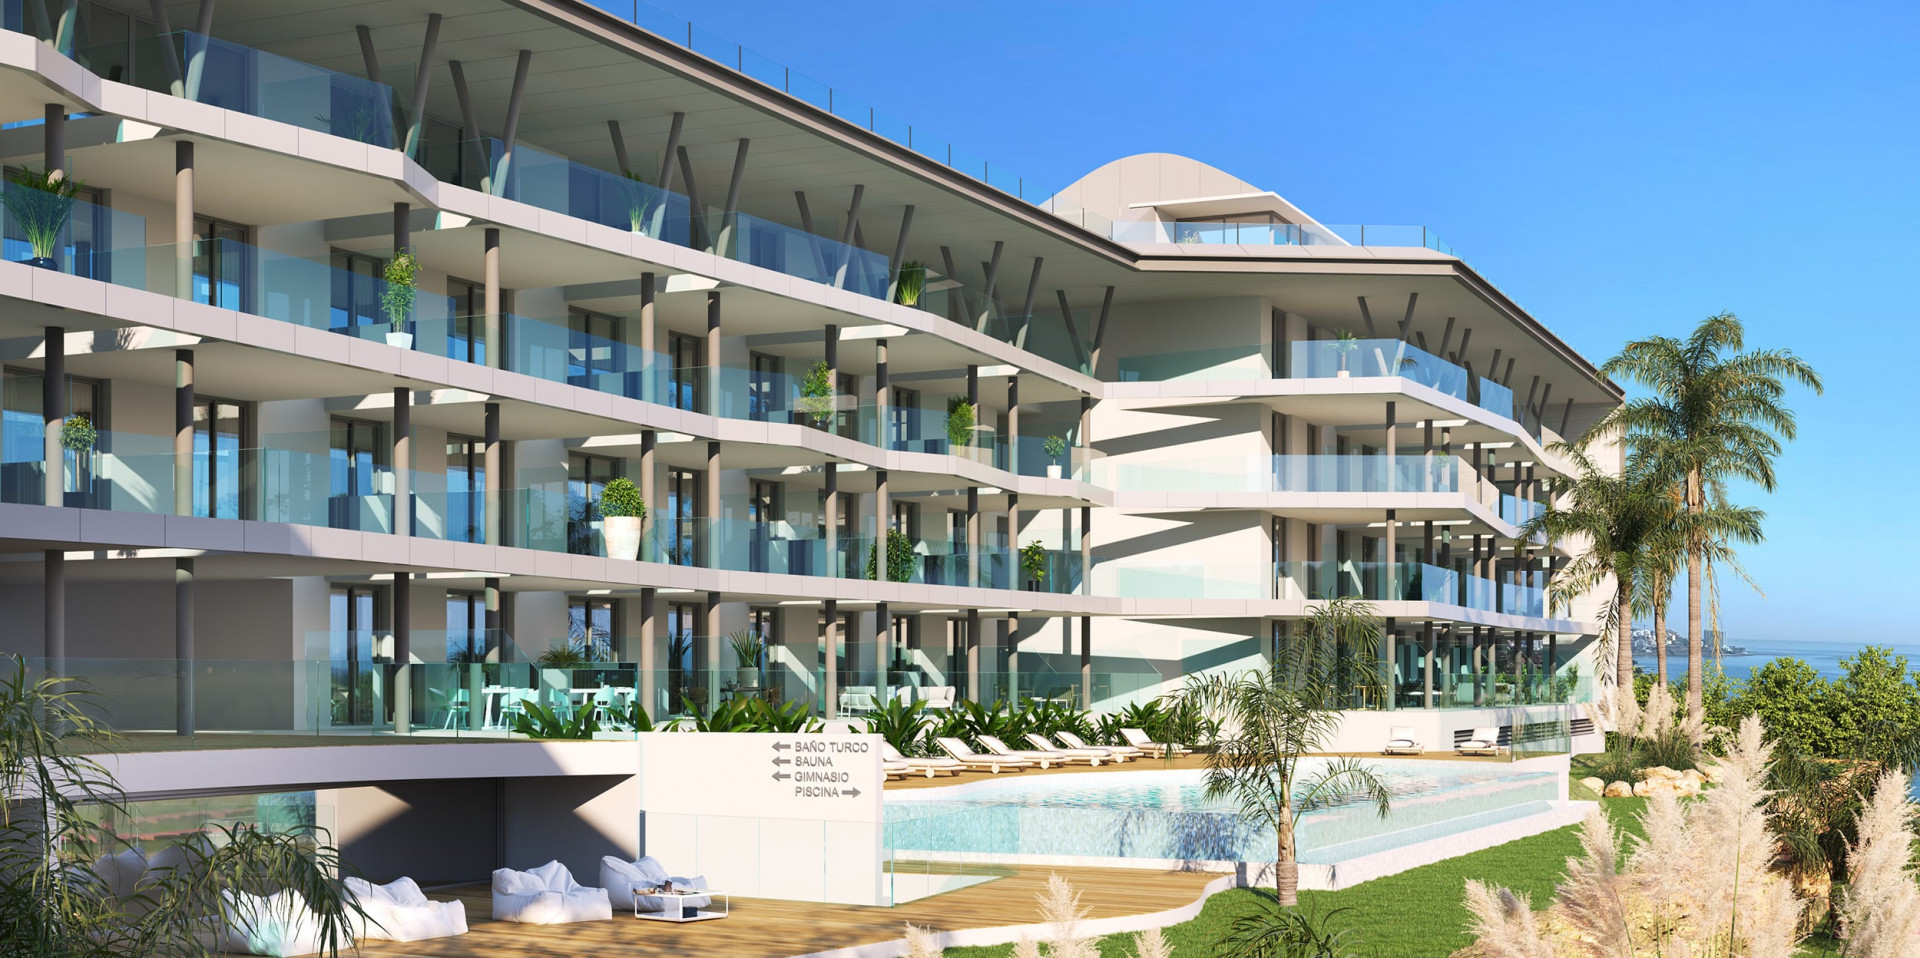 Seaviews Reserve: Flats and penthouses with views of the Benalmádena coast.